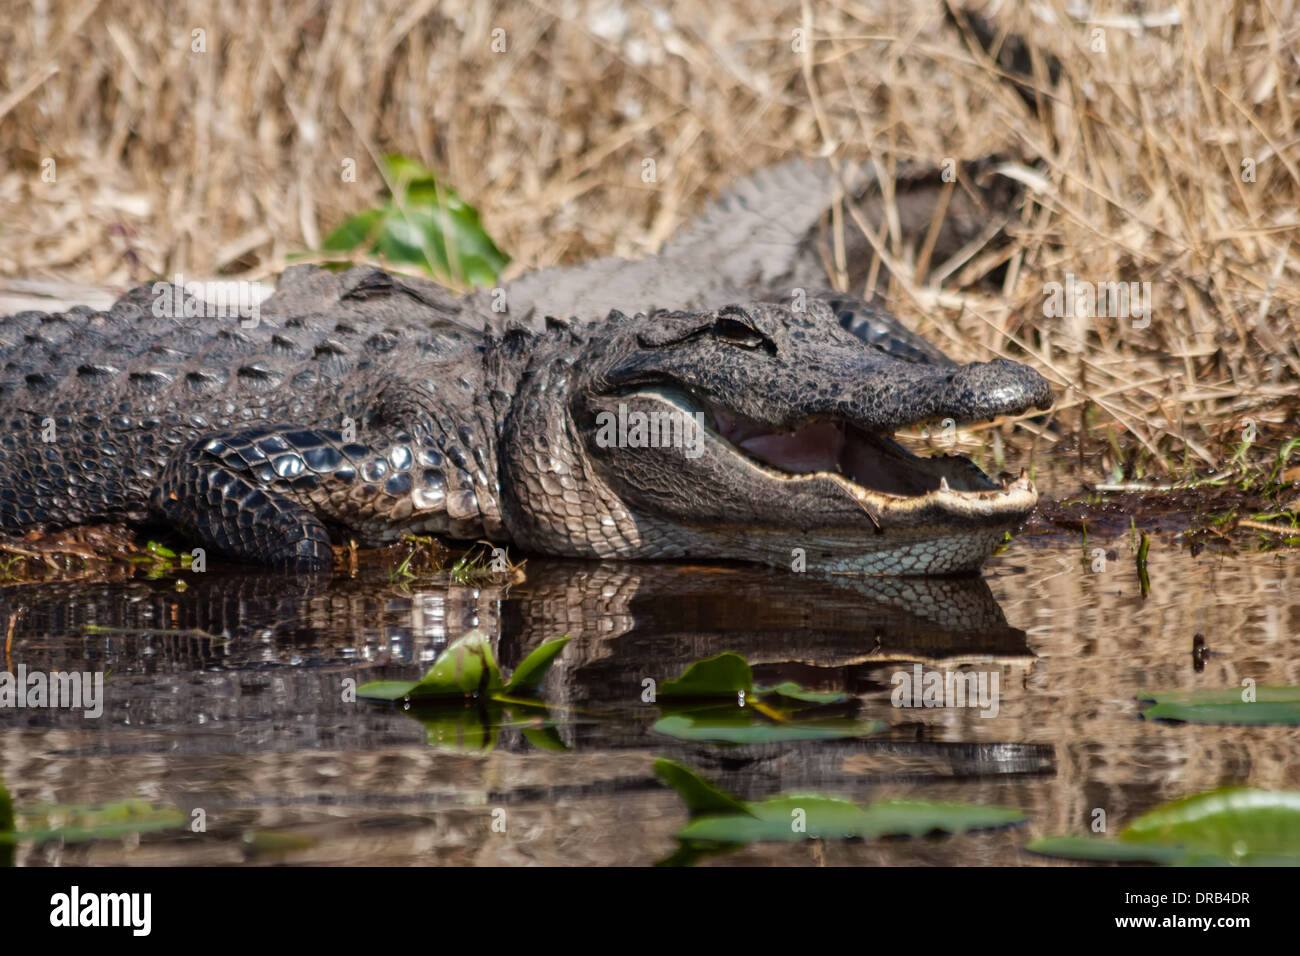 An American alligator (Alligator mississippiensis) warming itself by sitting in the sun in a swamp. Stock Photo